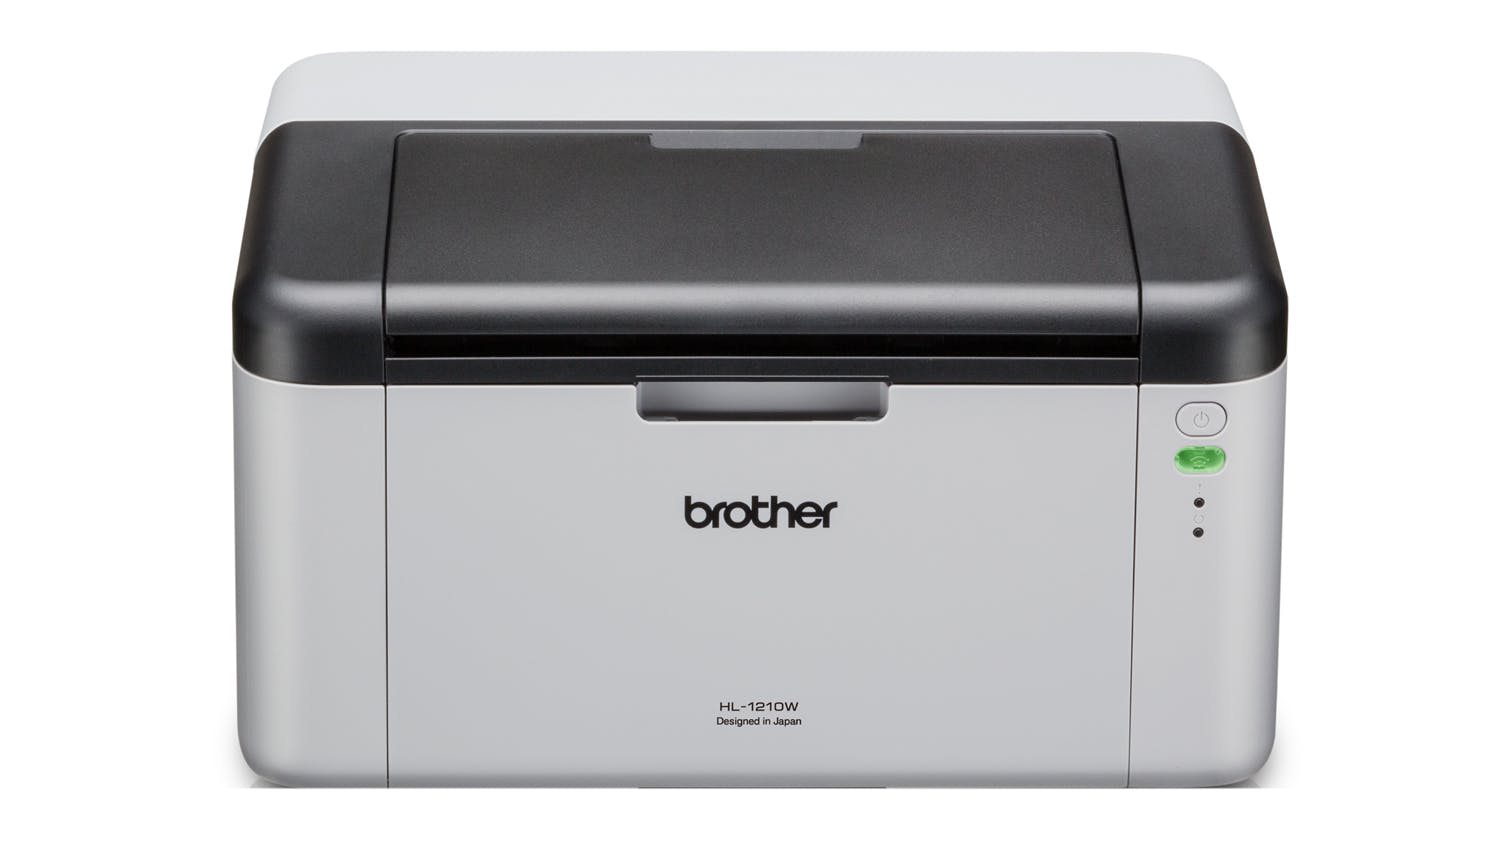 Brother hl 1212wr. Brother 1210wr. Brother hl-1210w Series. Принтер brother hl 5100dn. Brother принтер 1210.